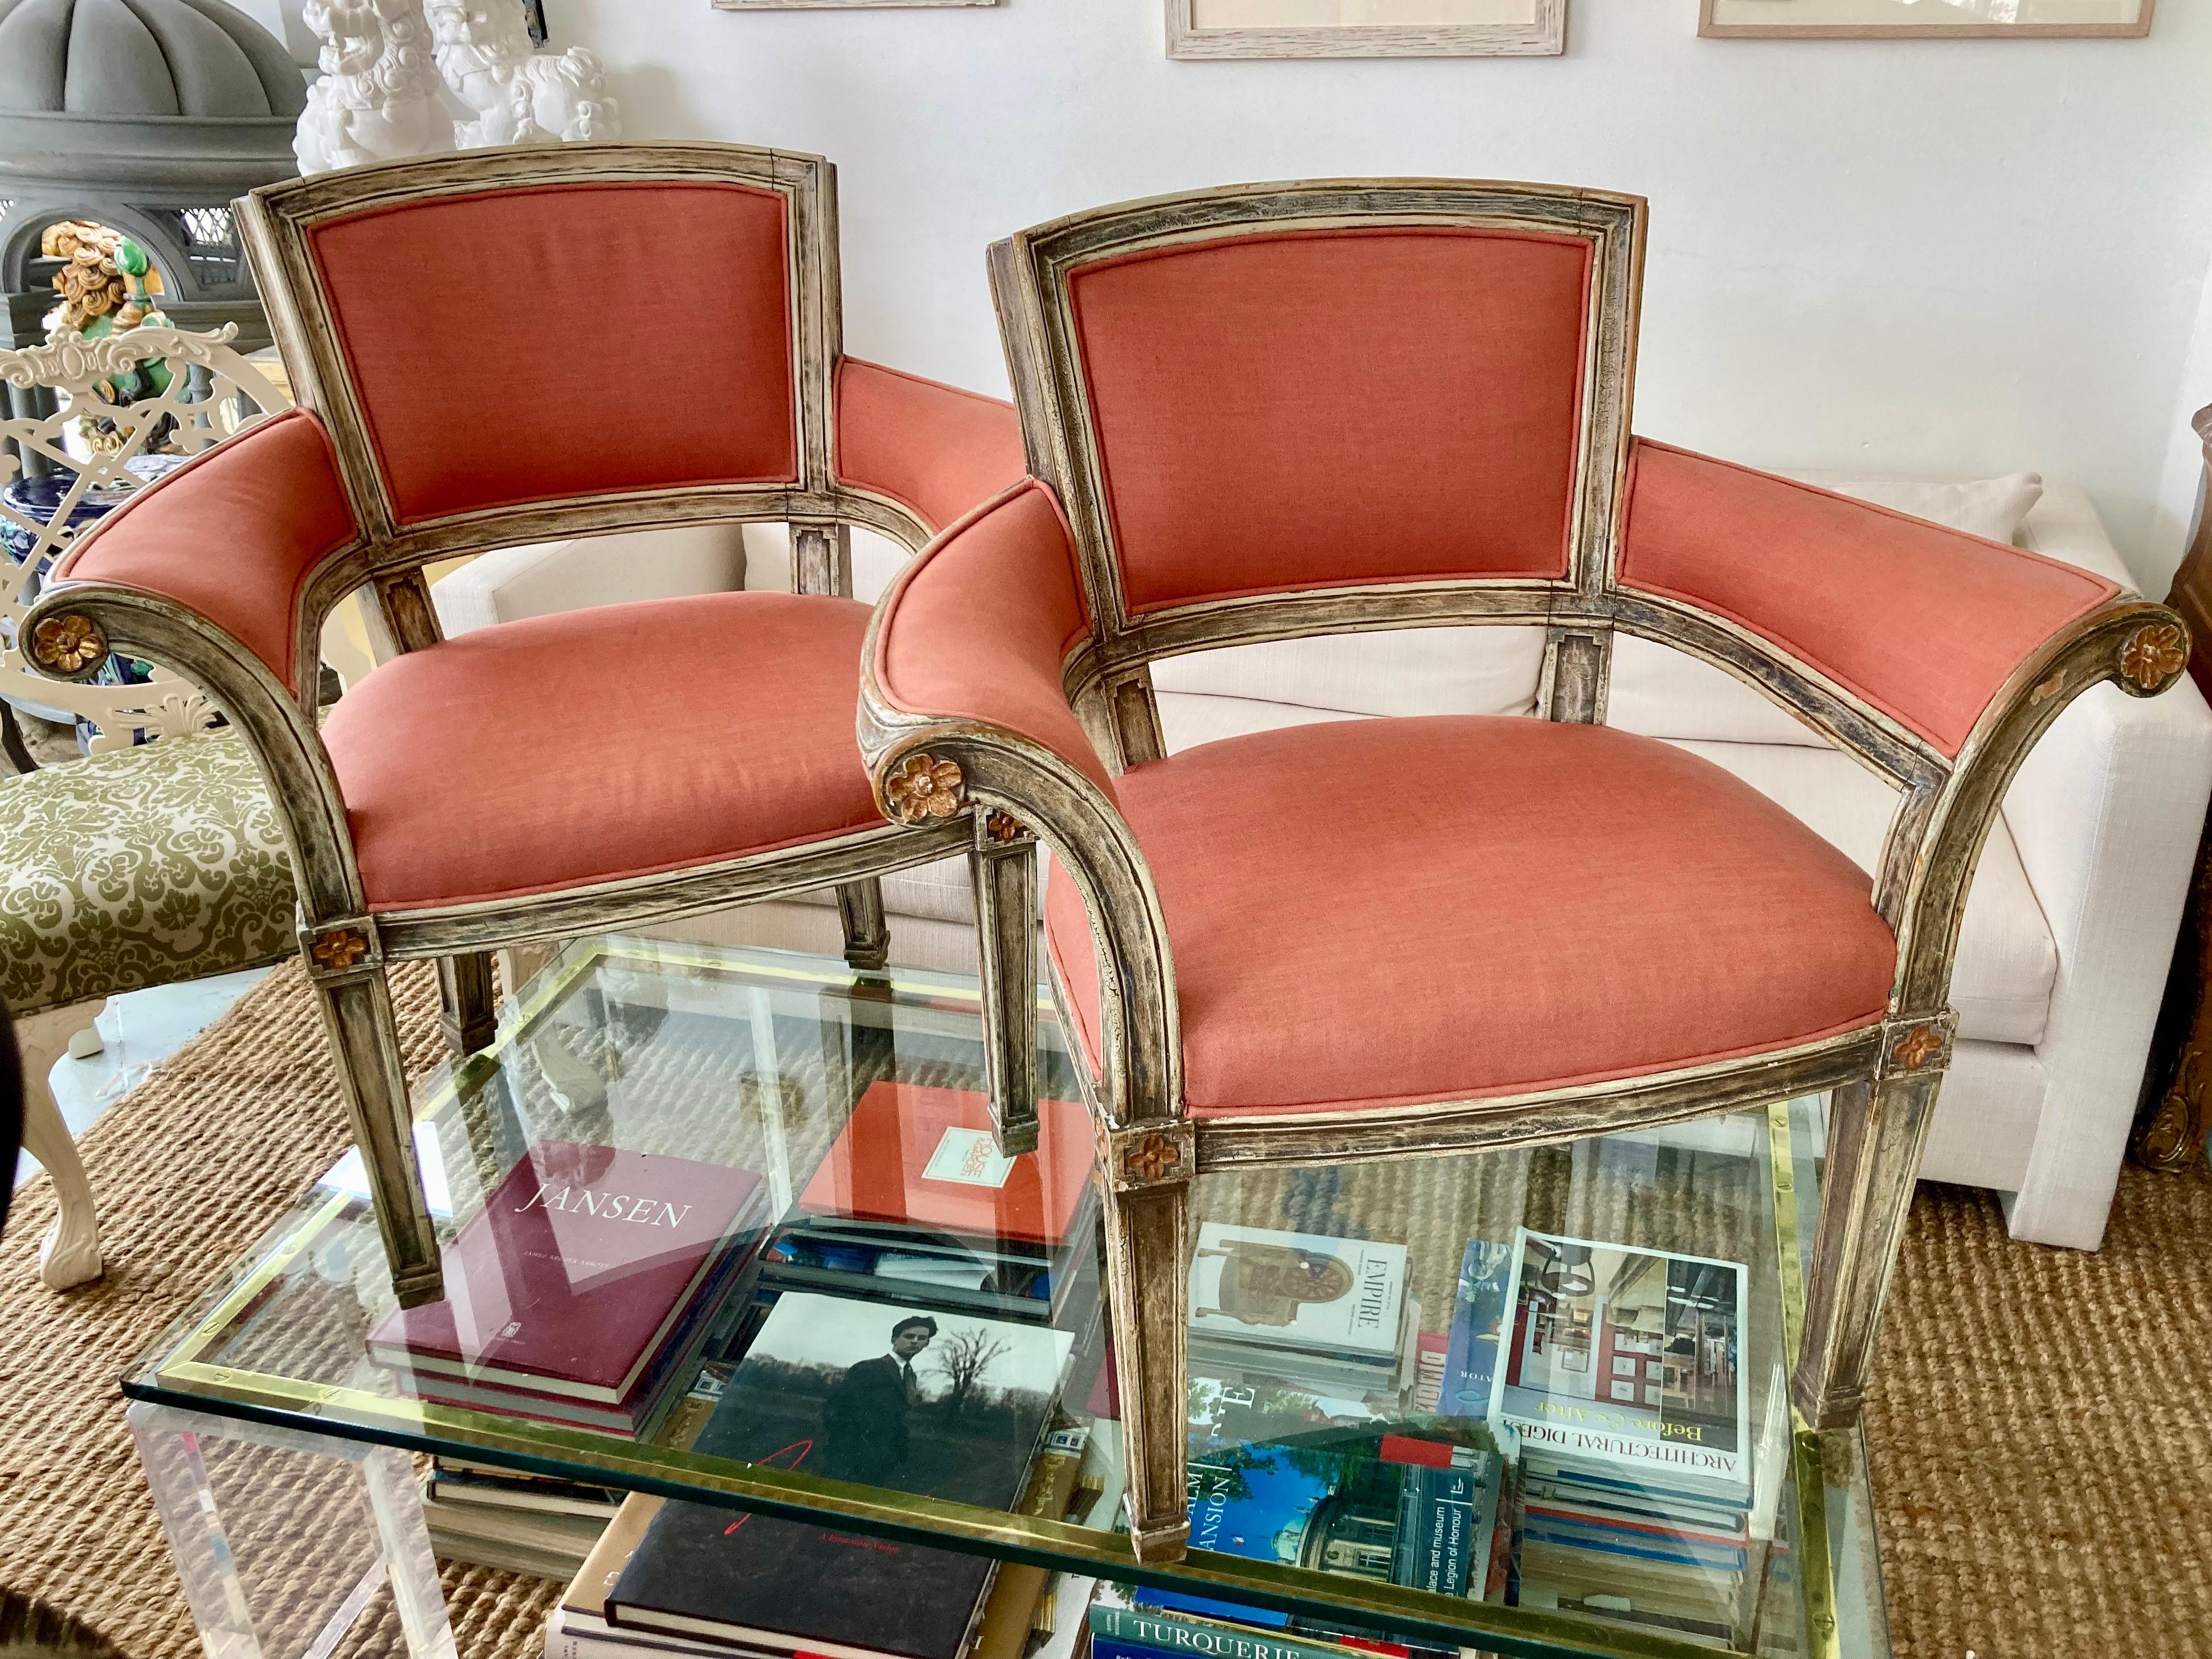 Gorgeous French style transitional fauteuils upholstered in linen. Gorgeous detailing and quality upholstery work! Add some French style to your home.